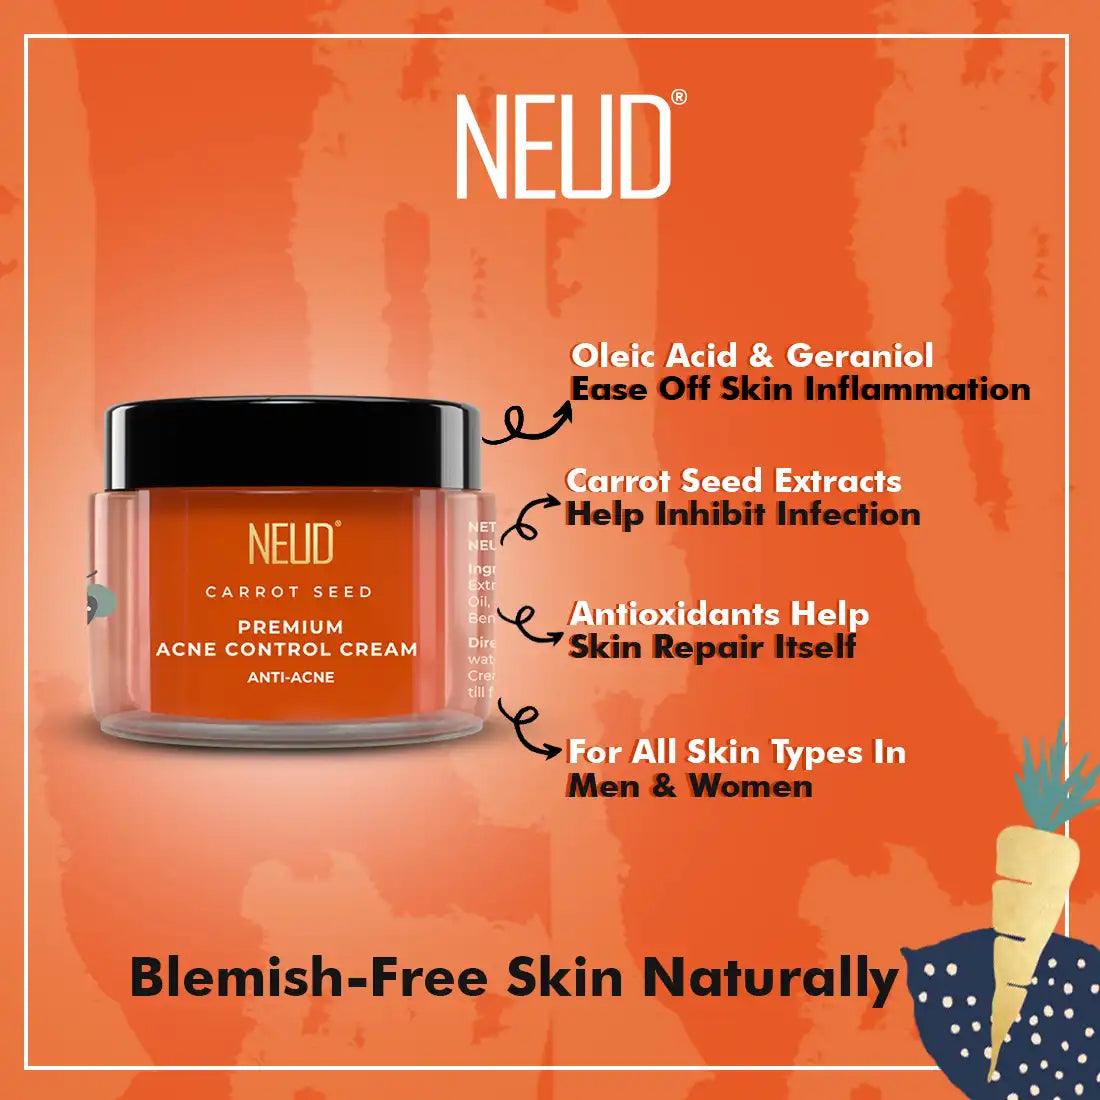 NEUD Carrot Seed Acne Control Cream Contains Oleic Acid and geraniol. It helps prevent pimple causing infection and boosts skin repair - everteen-neud.com